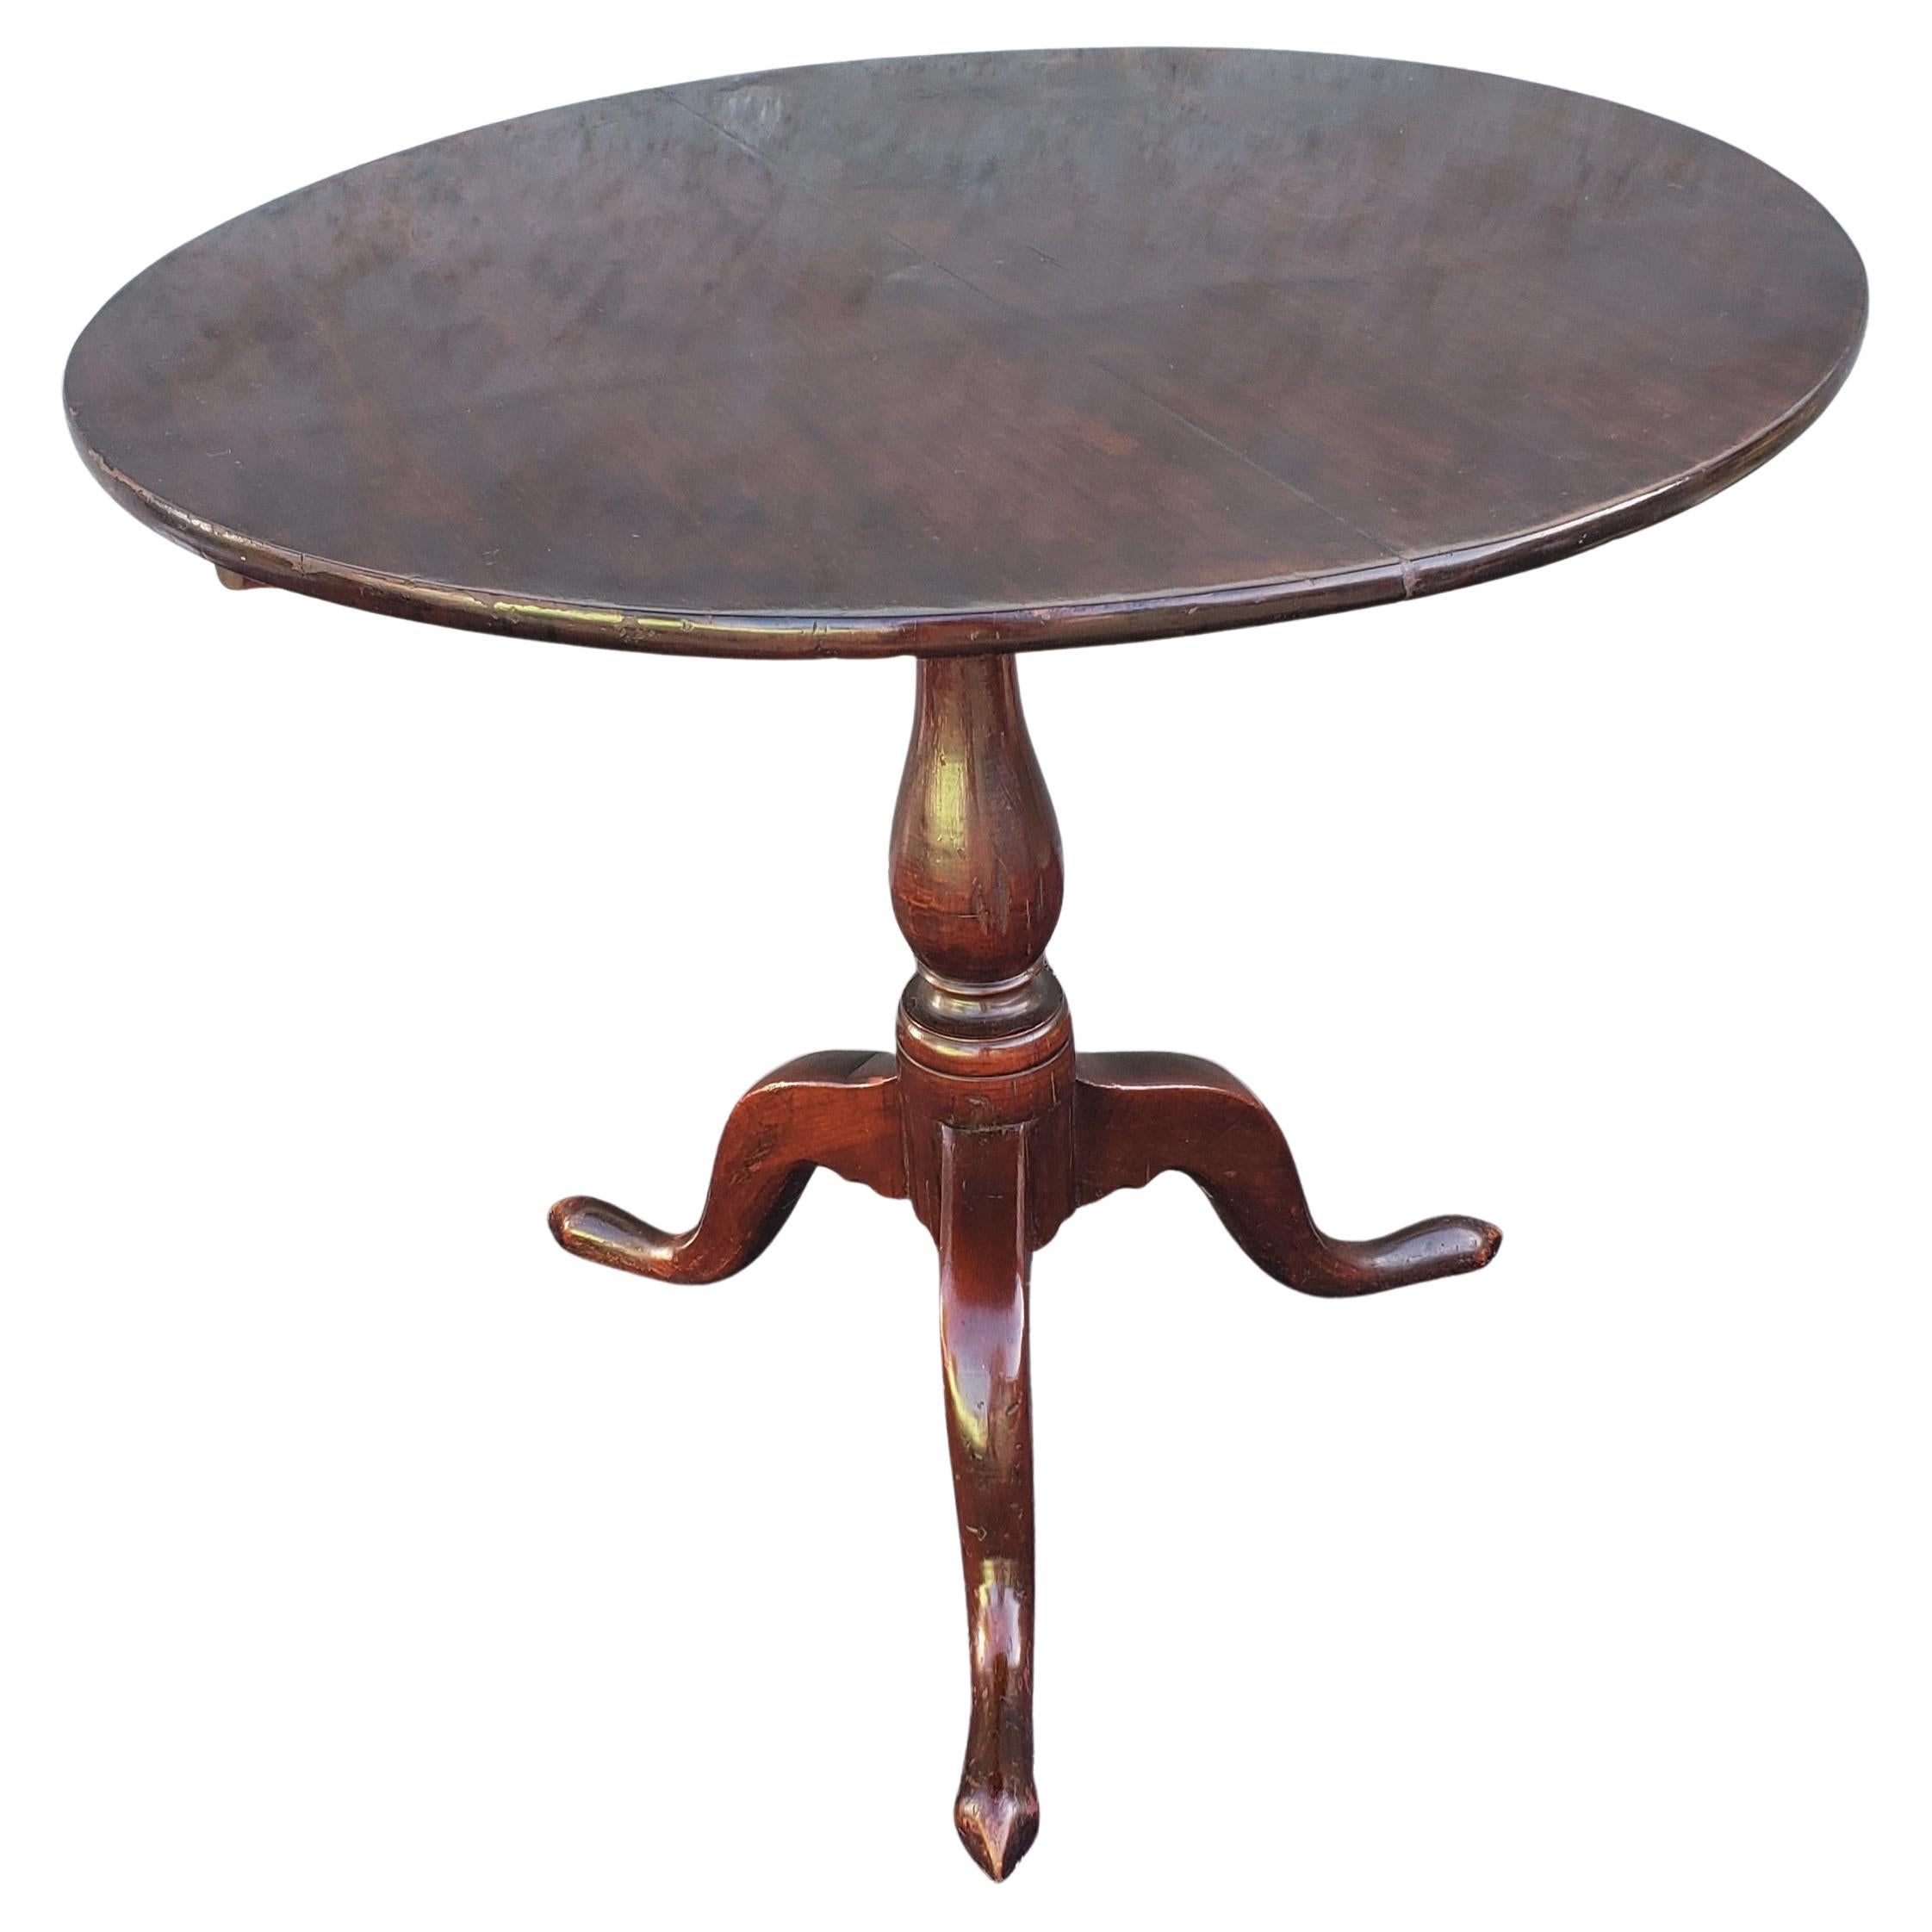 Hand-Carved English Mahogany One Board Tilt-Top Pedestal Tea Table Desert Table, Circa 1760s For Sale